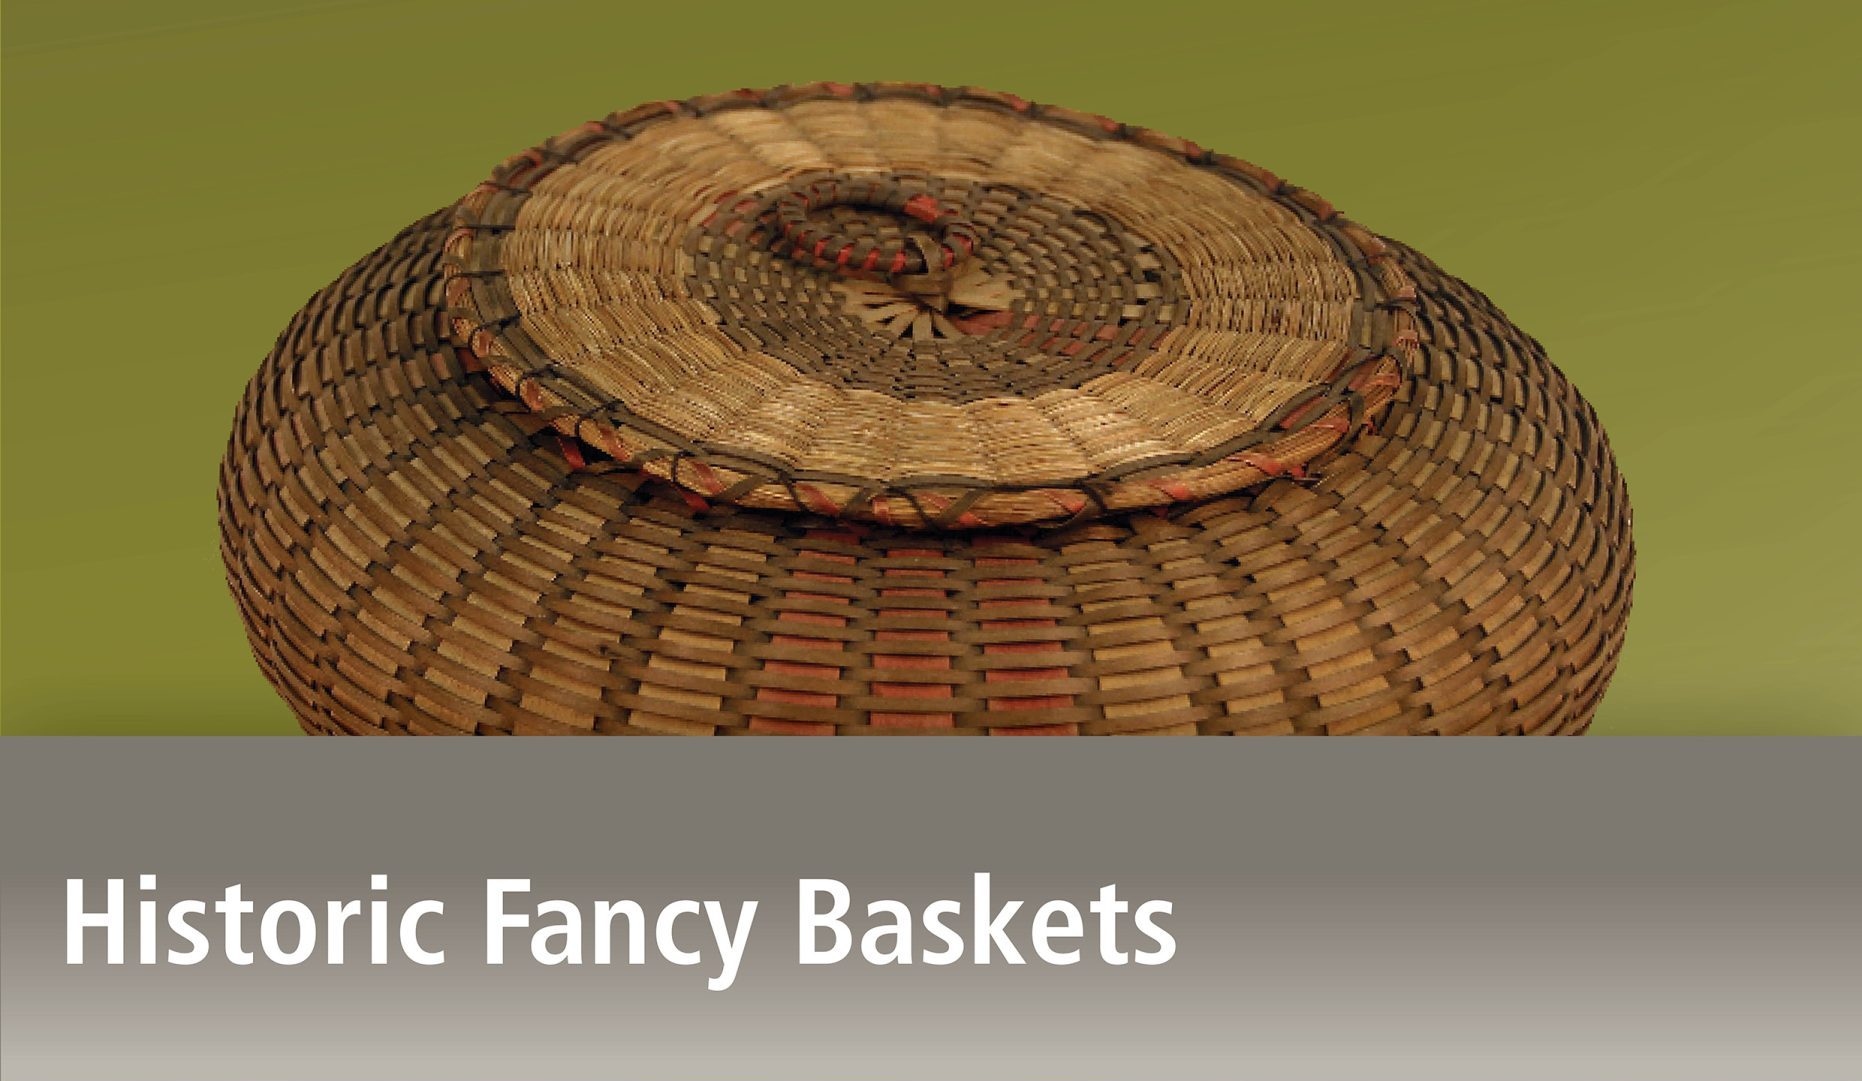 Image of round basket with cover featuring red strips, sweetgrass, and a ring handle above the title Historic Fancy Baskets